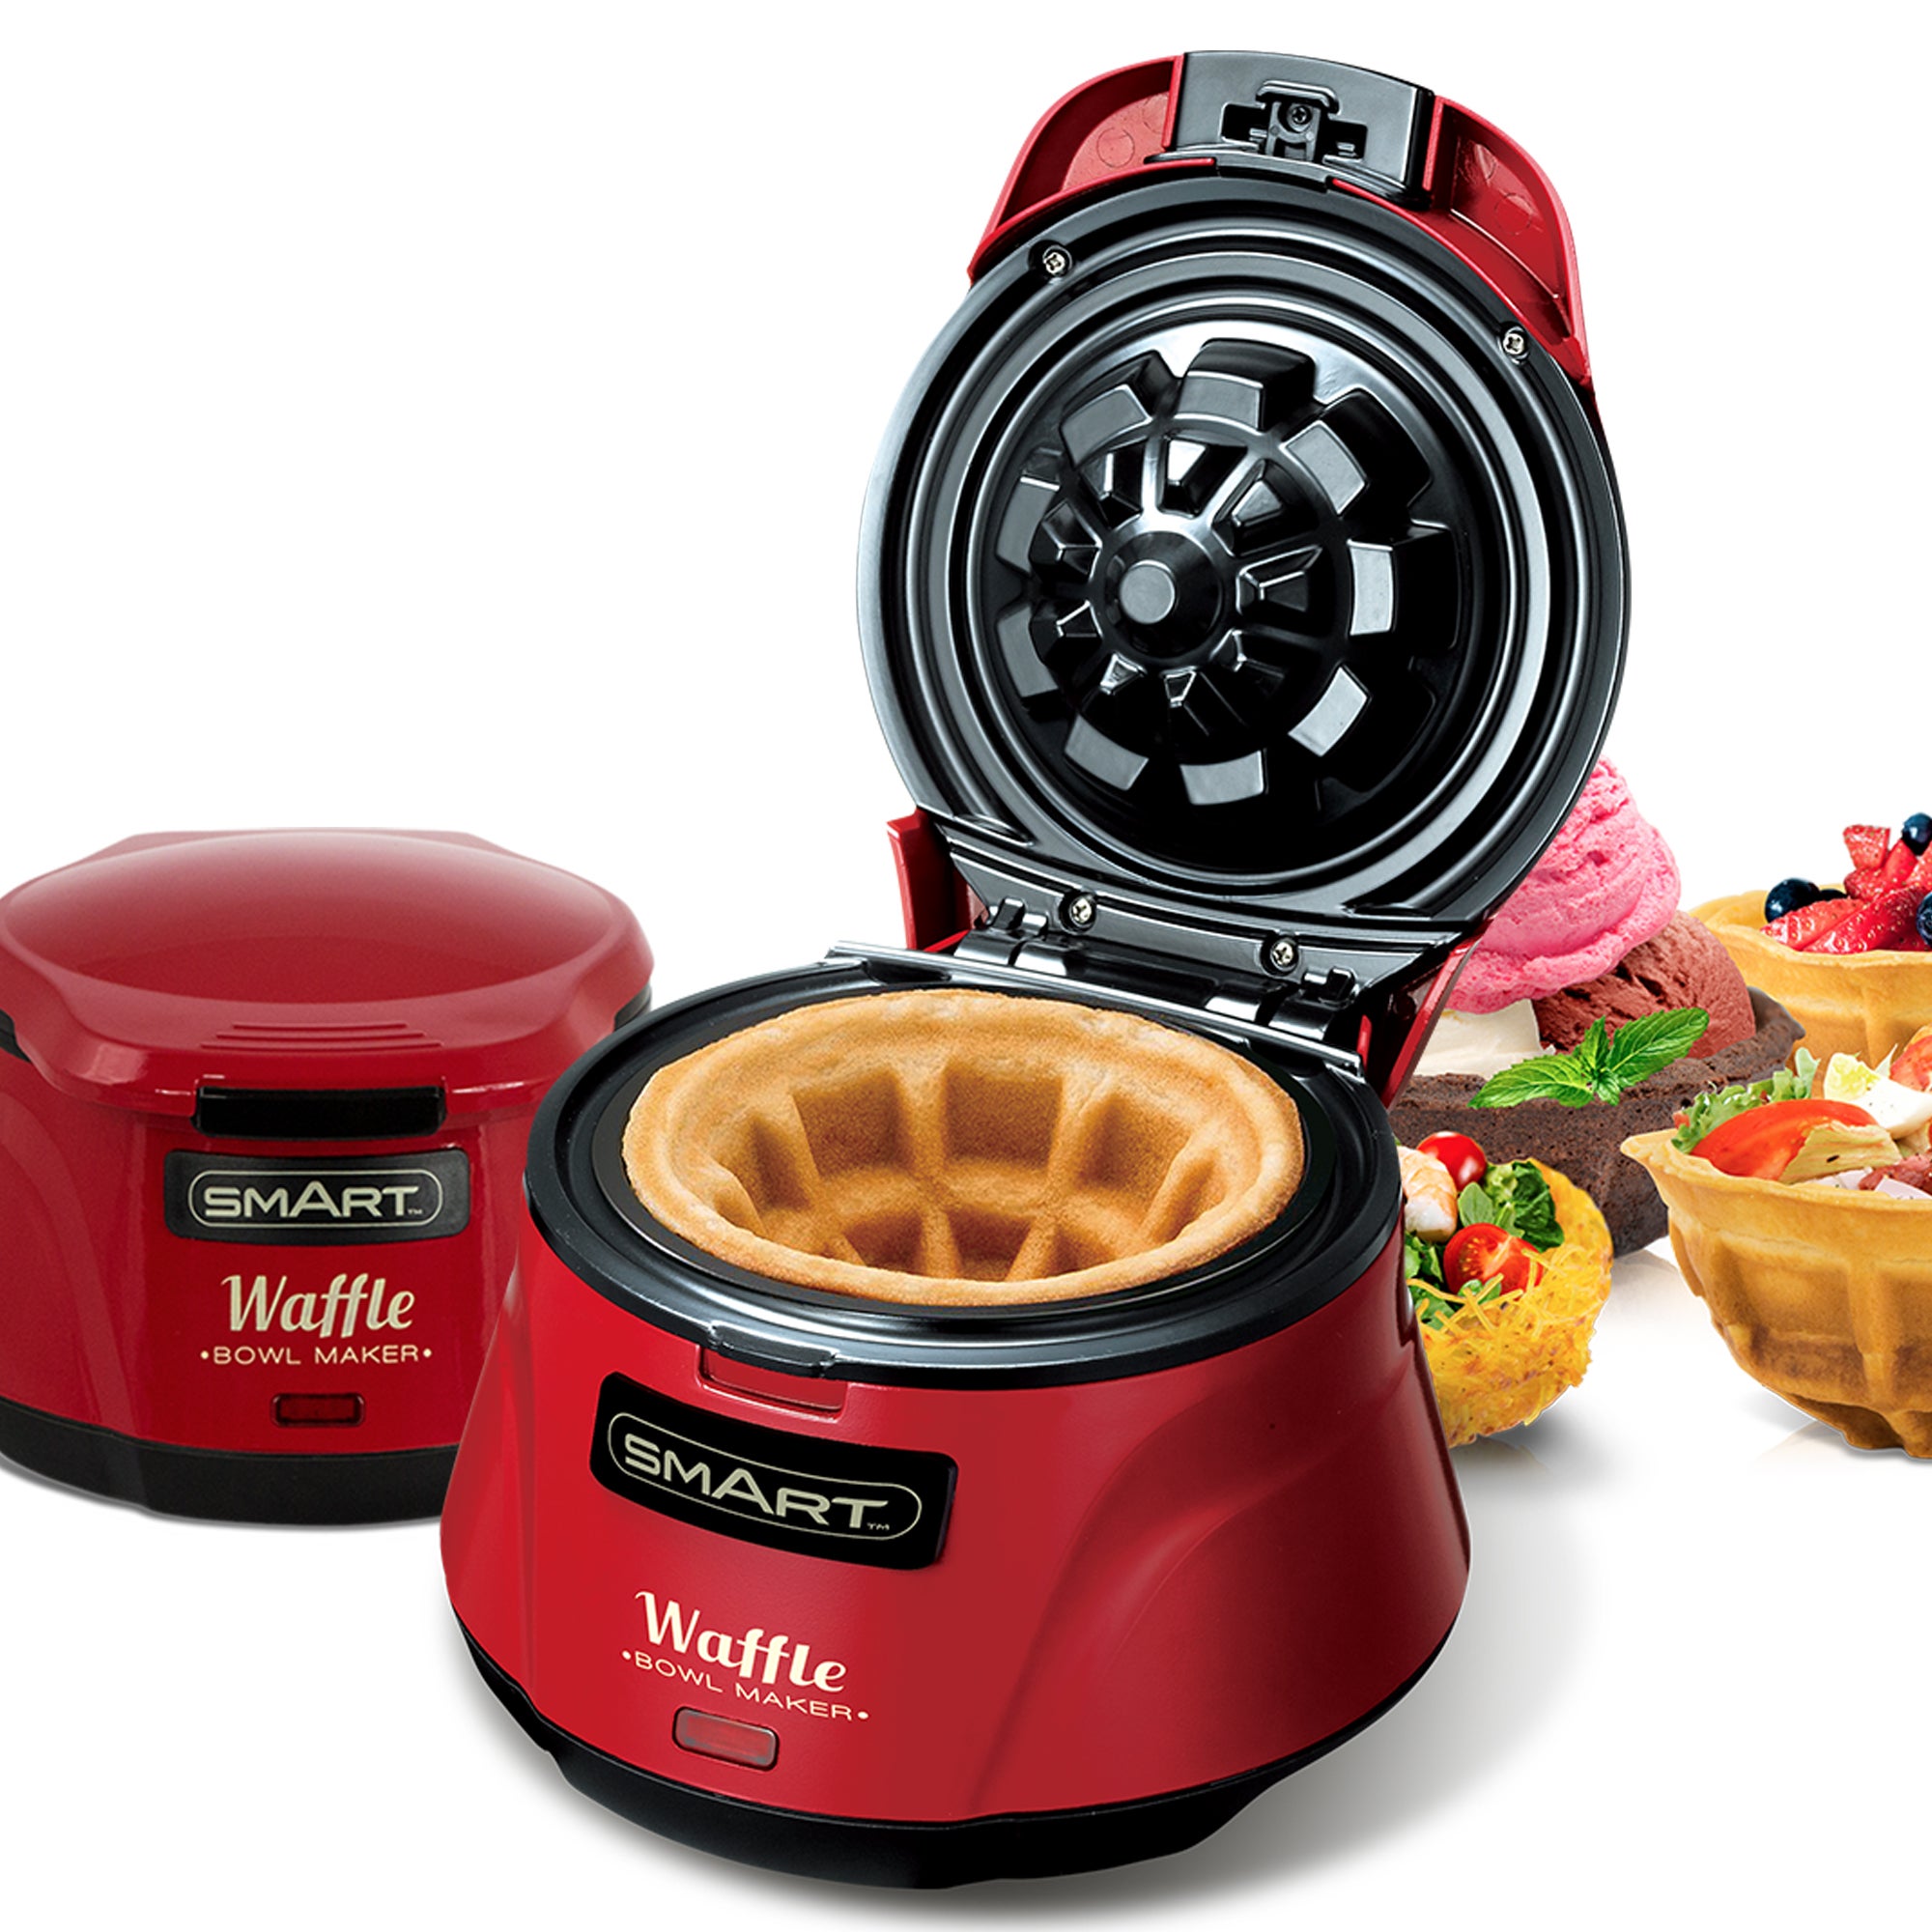 Photos - Toaster Smart Waffle Bowl Maker Red 